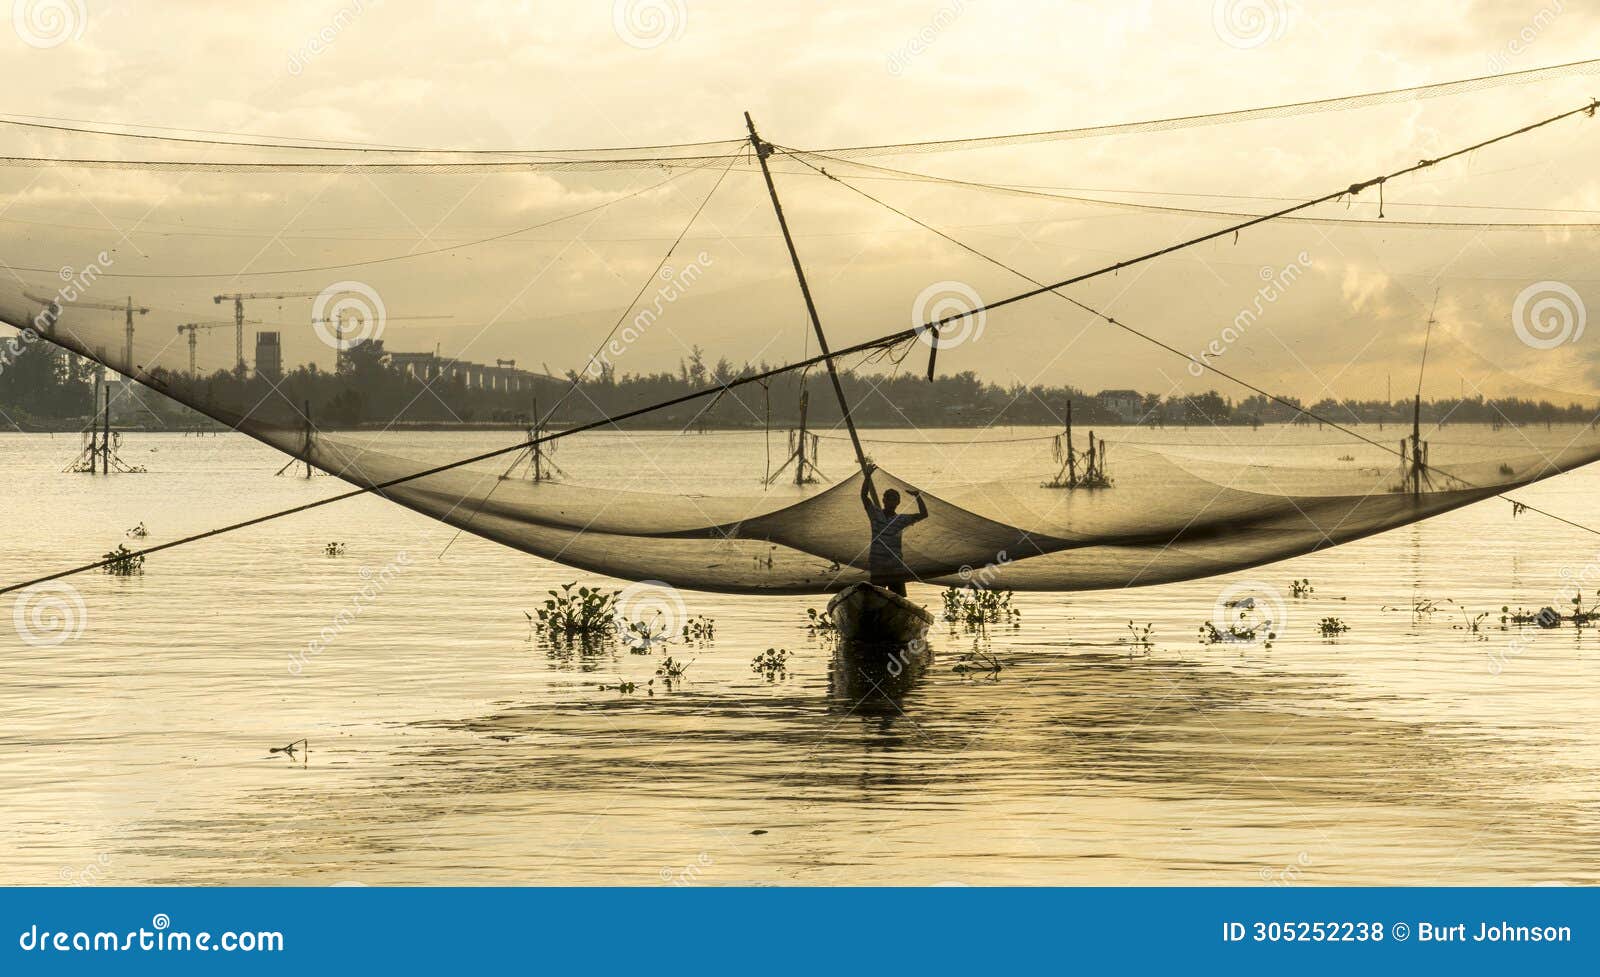 Man Standing in Boat on Water with Fishing Nets at Sunrise in Hoi